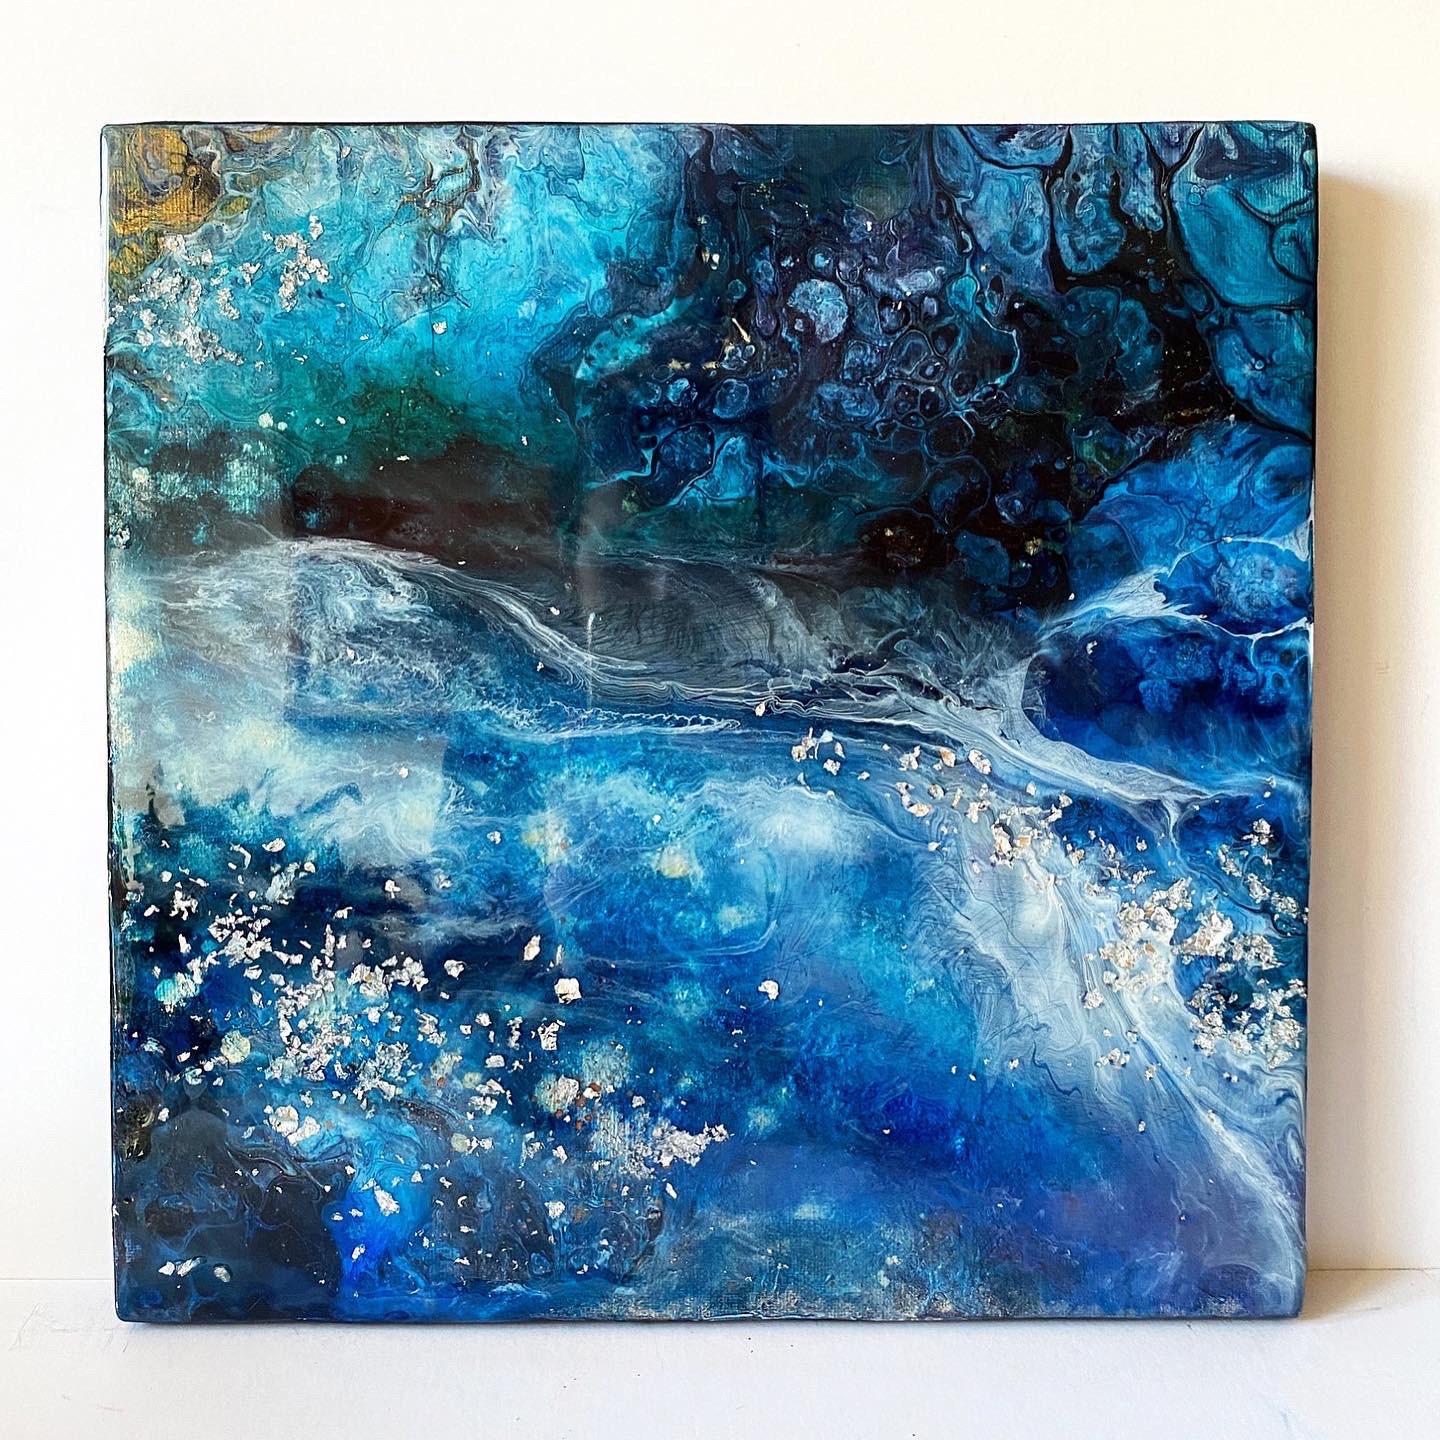 Framed Fluid Acrylic Painting Pour Art Modern Abstract Contemporary Cells  Resin Finish by Maria Brookes 990 X 675 Mm 39 X 26.5 Inches 